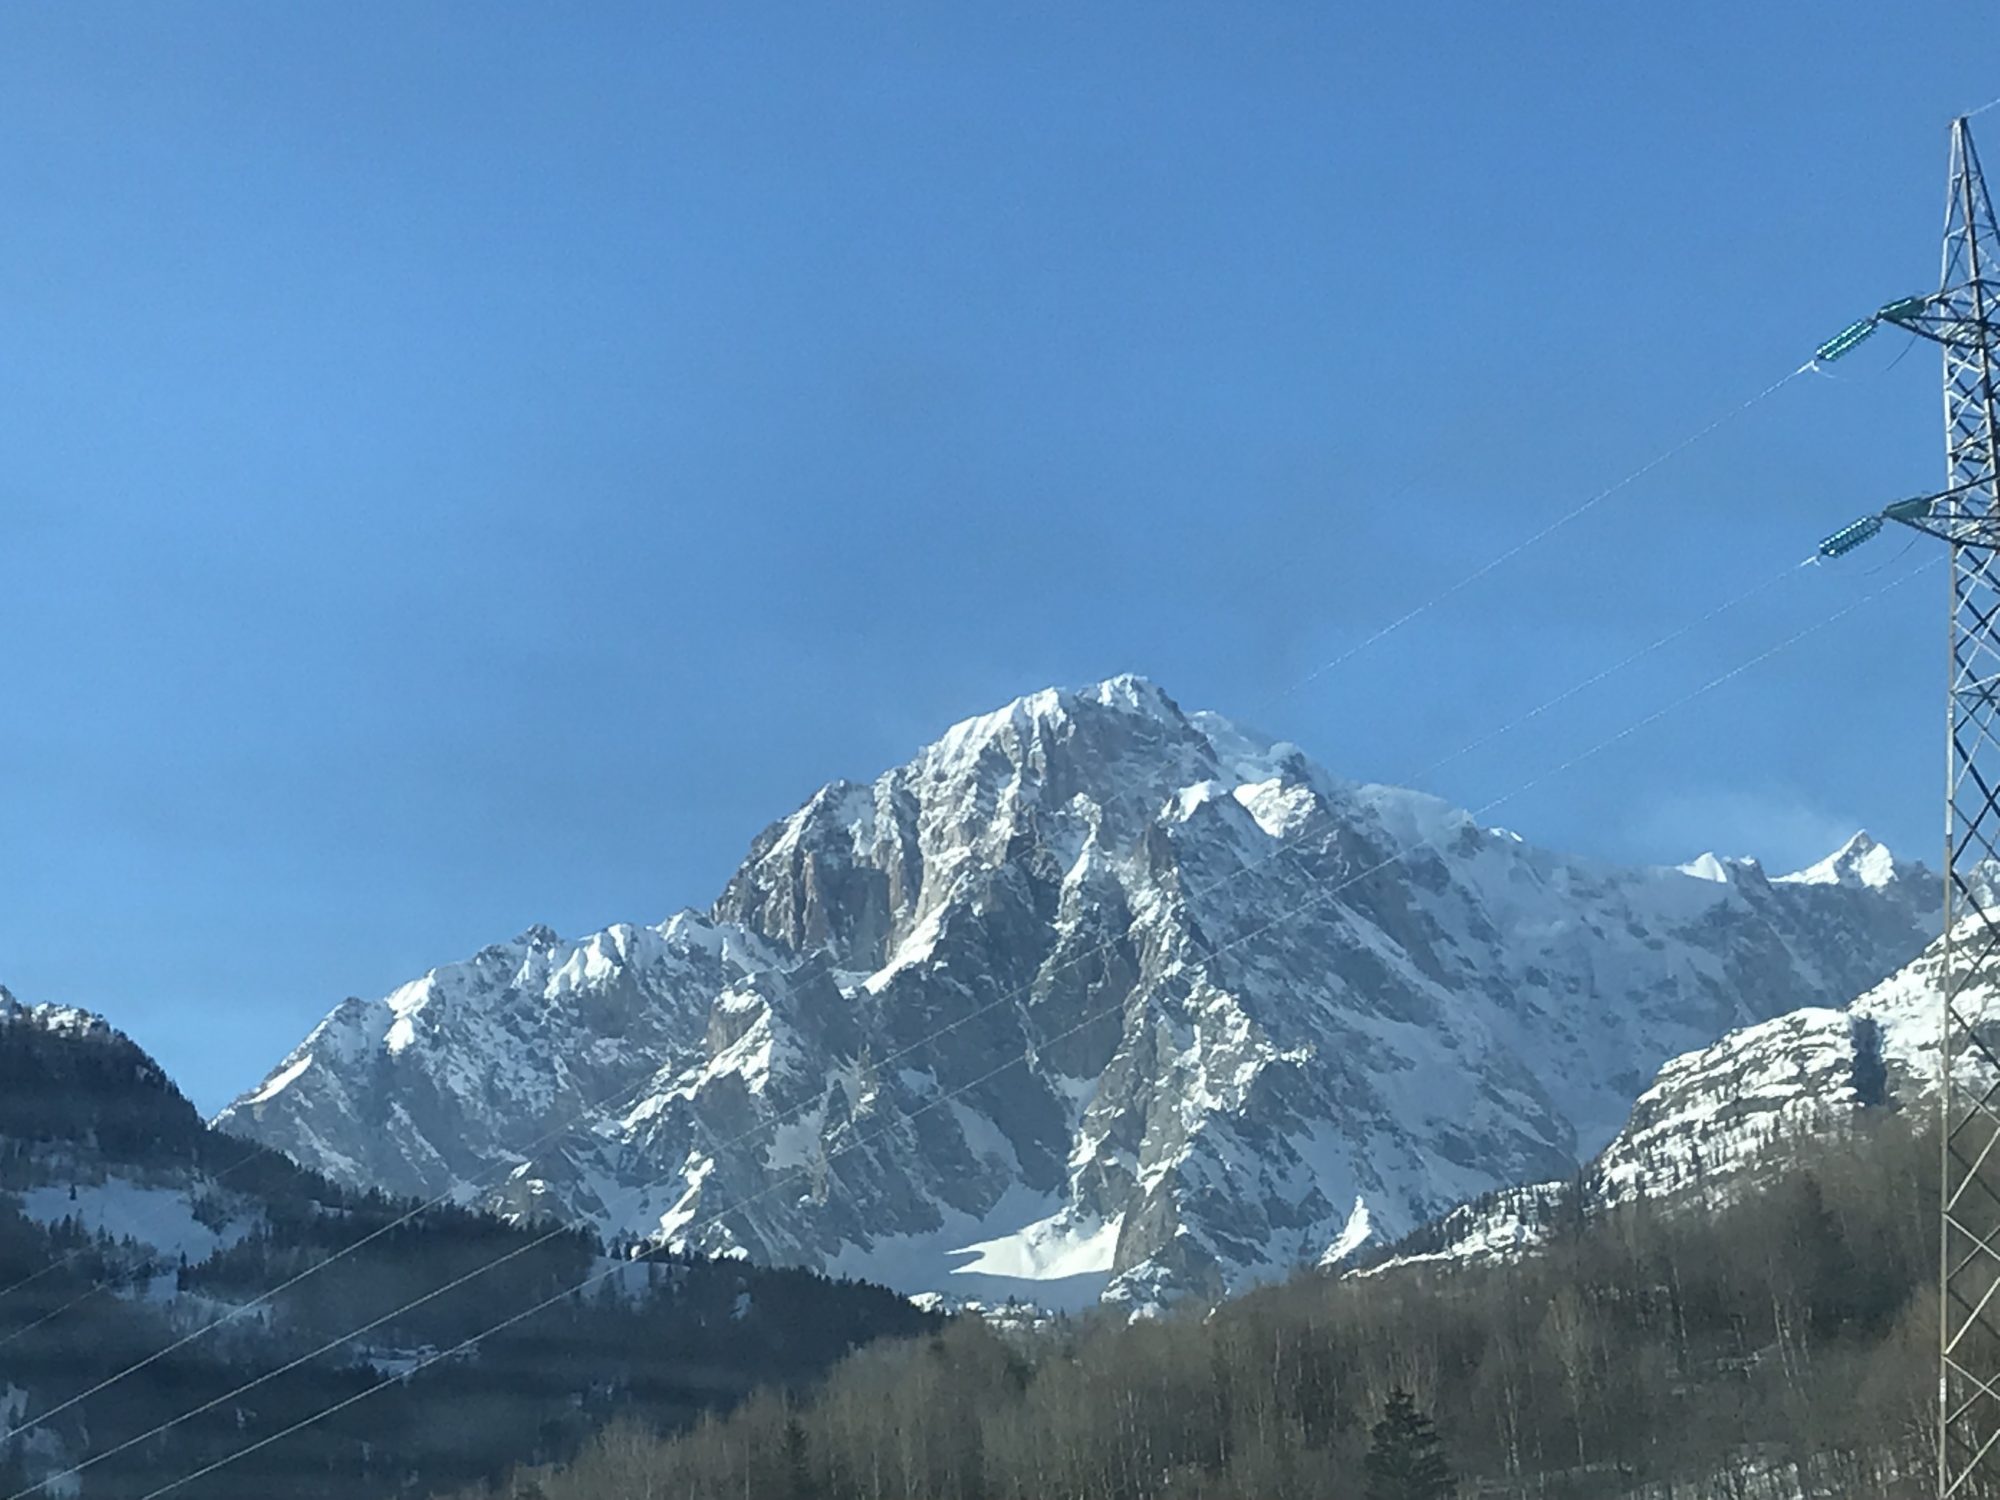 The mighty Monte Bianco - seen from Morgex, Aosta Valley. Photo: The-Ski-Guru. A Pilot may face punishment after landing on the Mont Blanc.